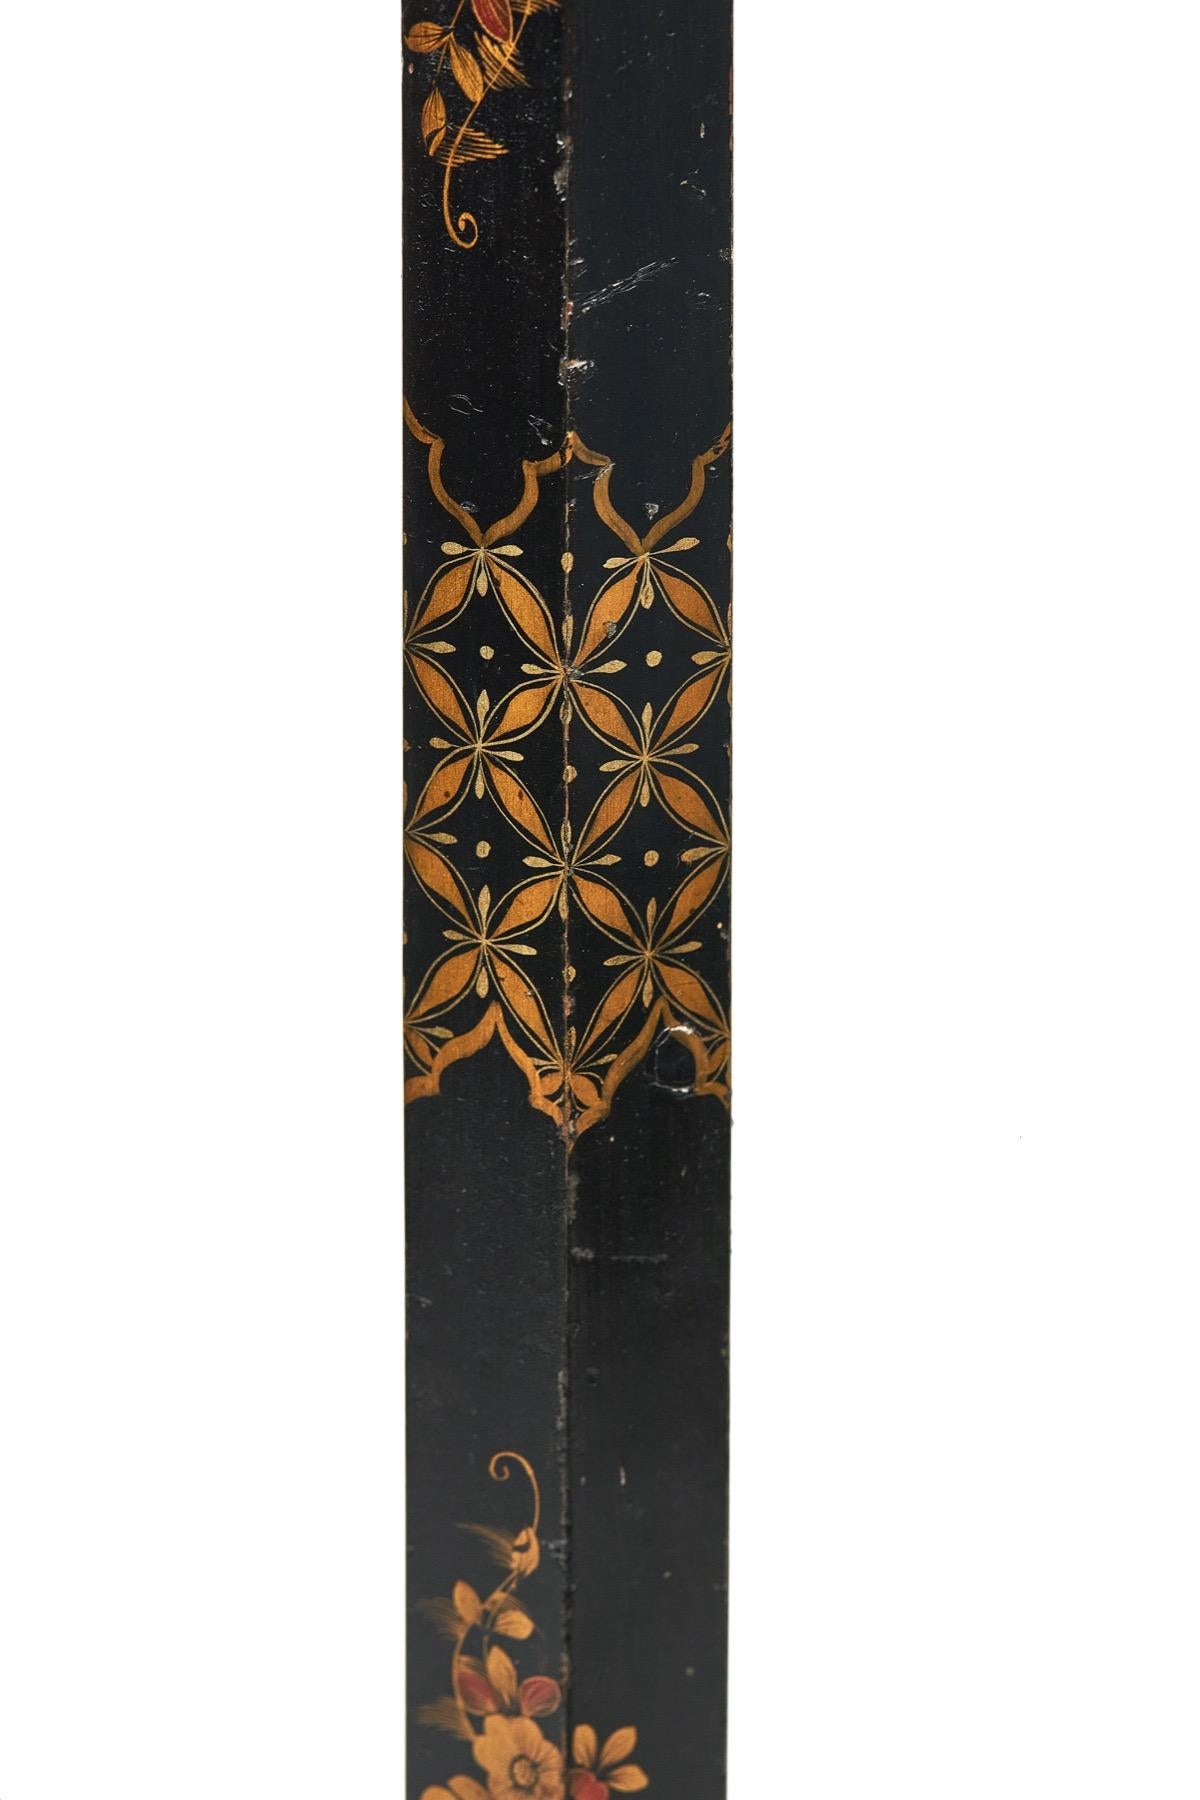 Chinoiserie Decorated Standard Lamp circa 1930s [B] For Sale 1